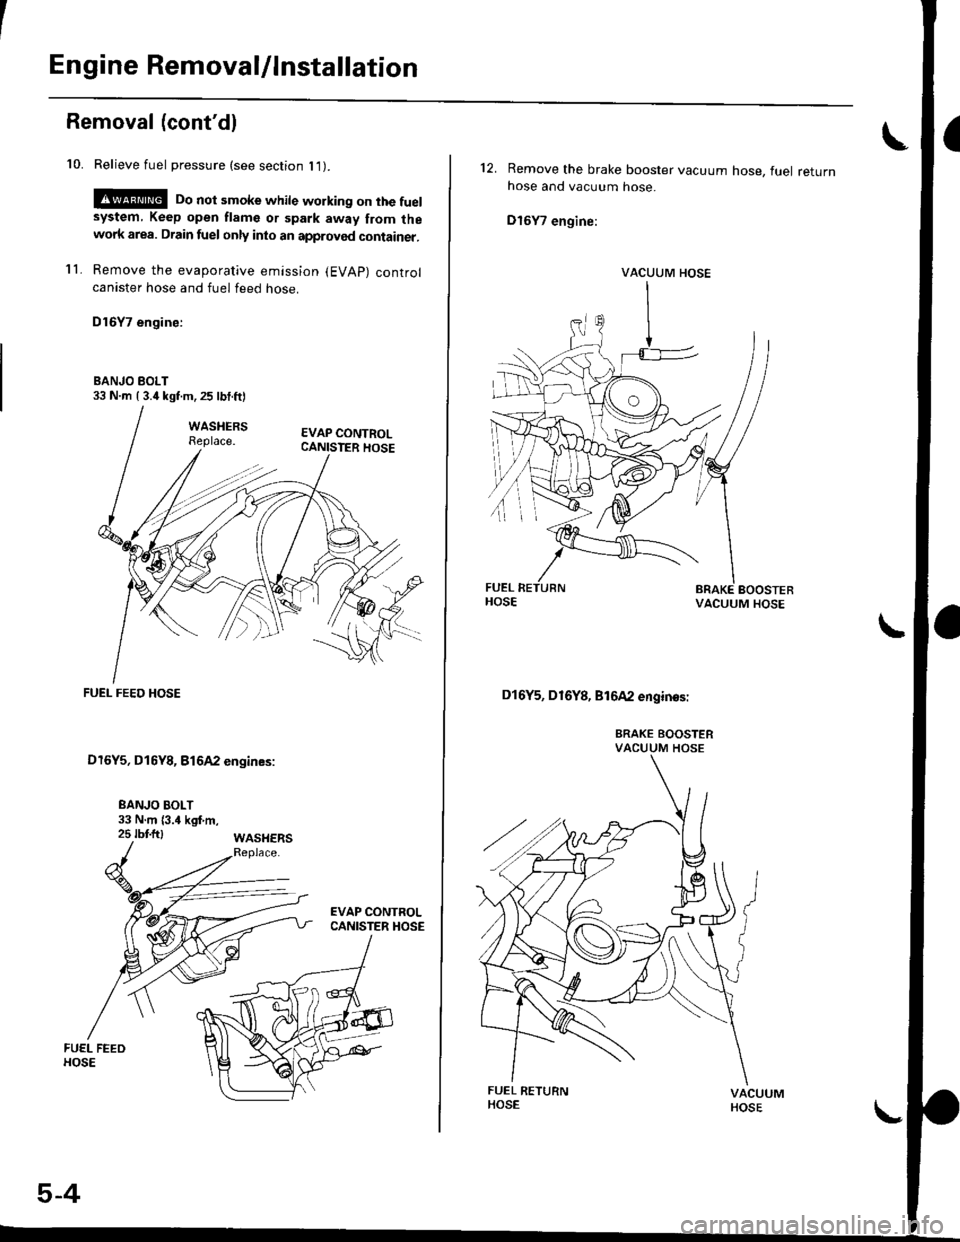 HONDA CIVIC 1997 6.G Owners Guide Engine Removal/lnstallation
Removal (contdl
10. Relieve fuel pressure (see section l1).
!@ Do not smoke while working on the fuelsystem, Keep open flame or spark away from thewolk area. Drain fuel on